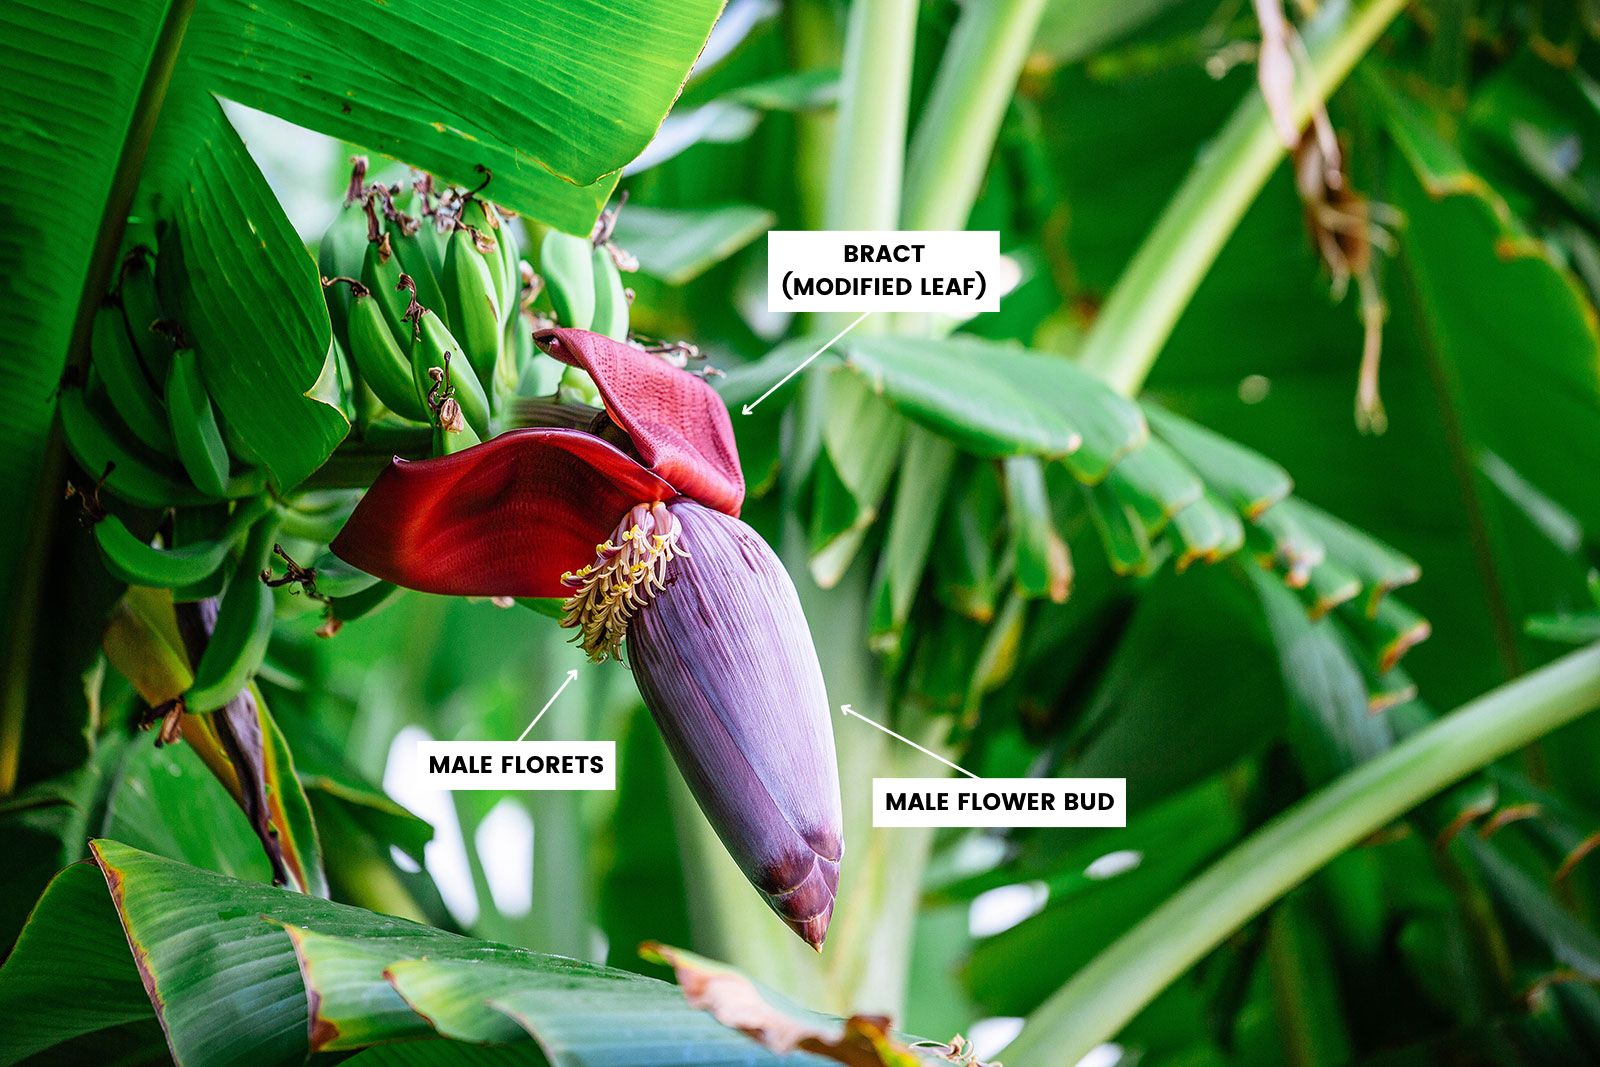 A young purple banana flower growing on the end of a green banana bunch